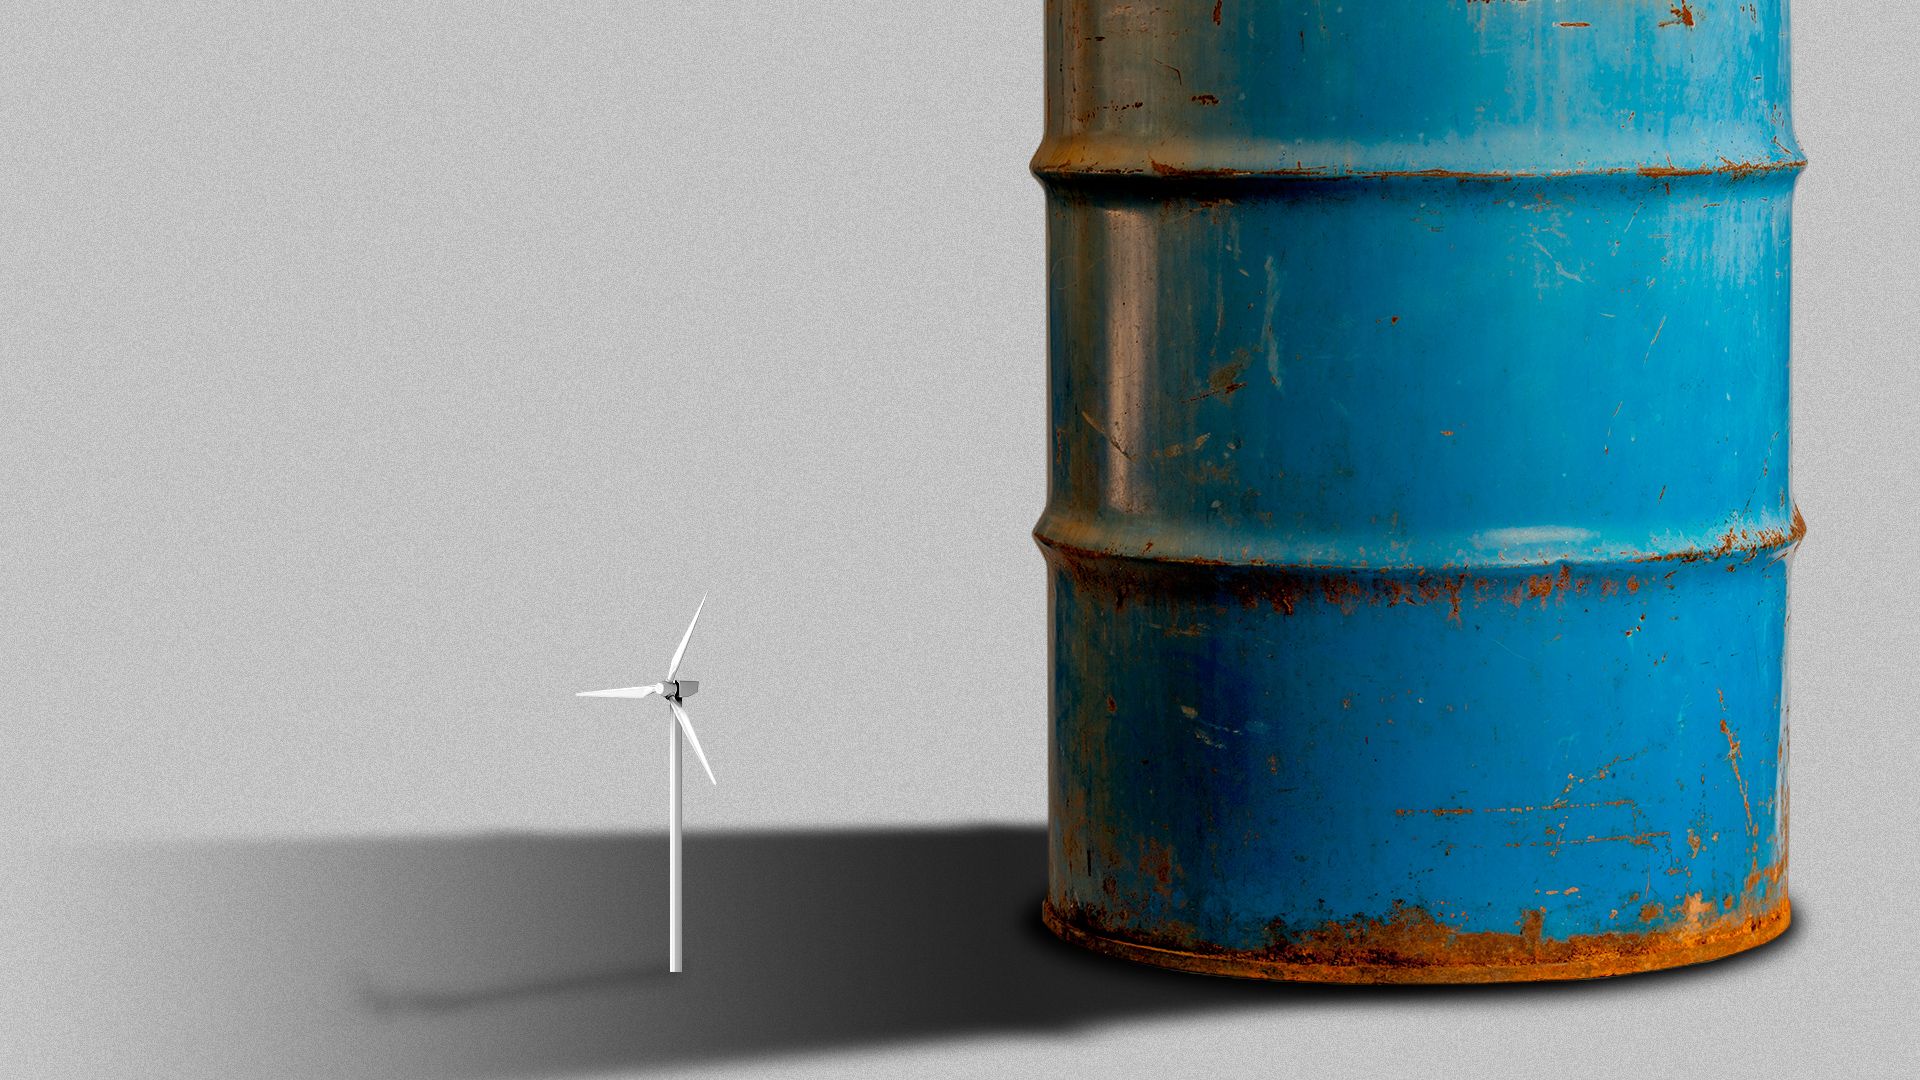 Illustration of a large oil barrel casting a shadow over a tiny wind turbine.